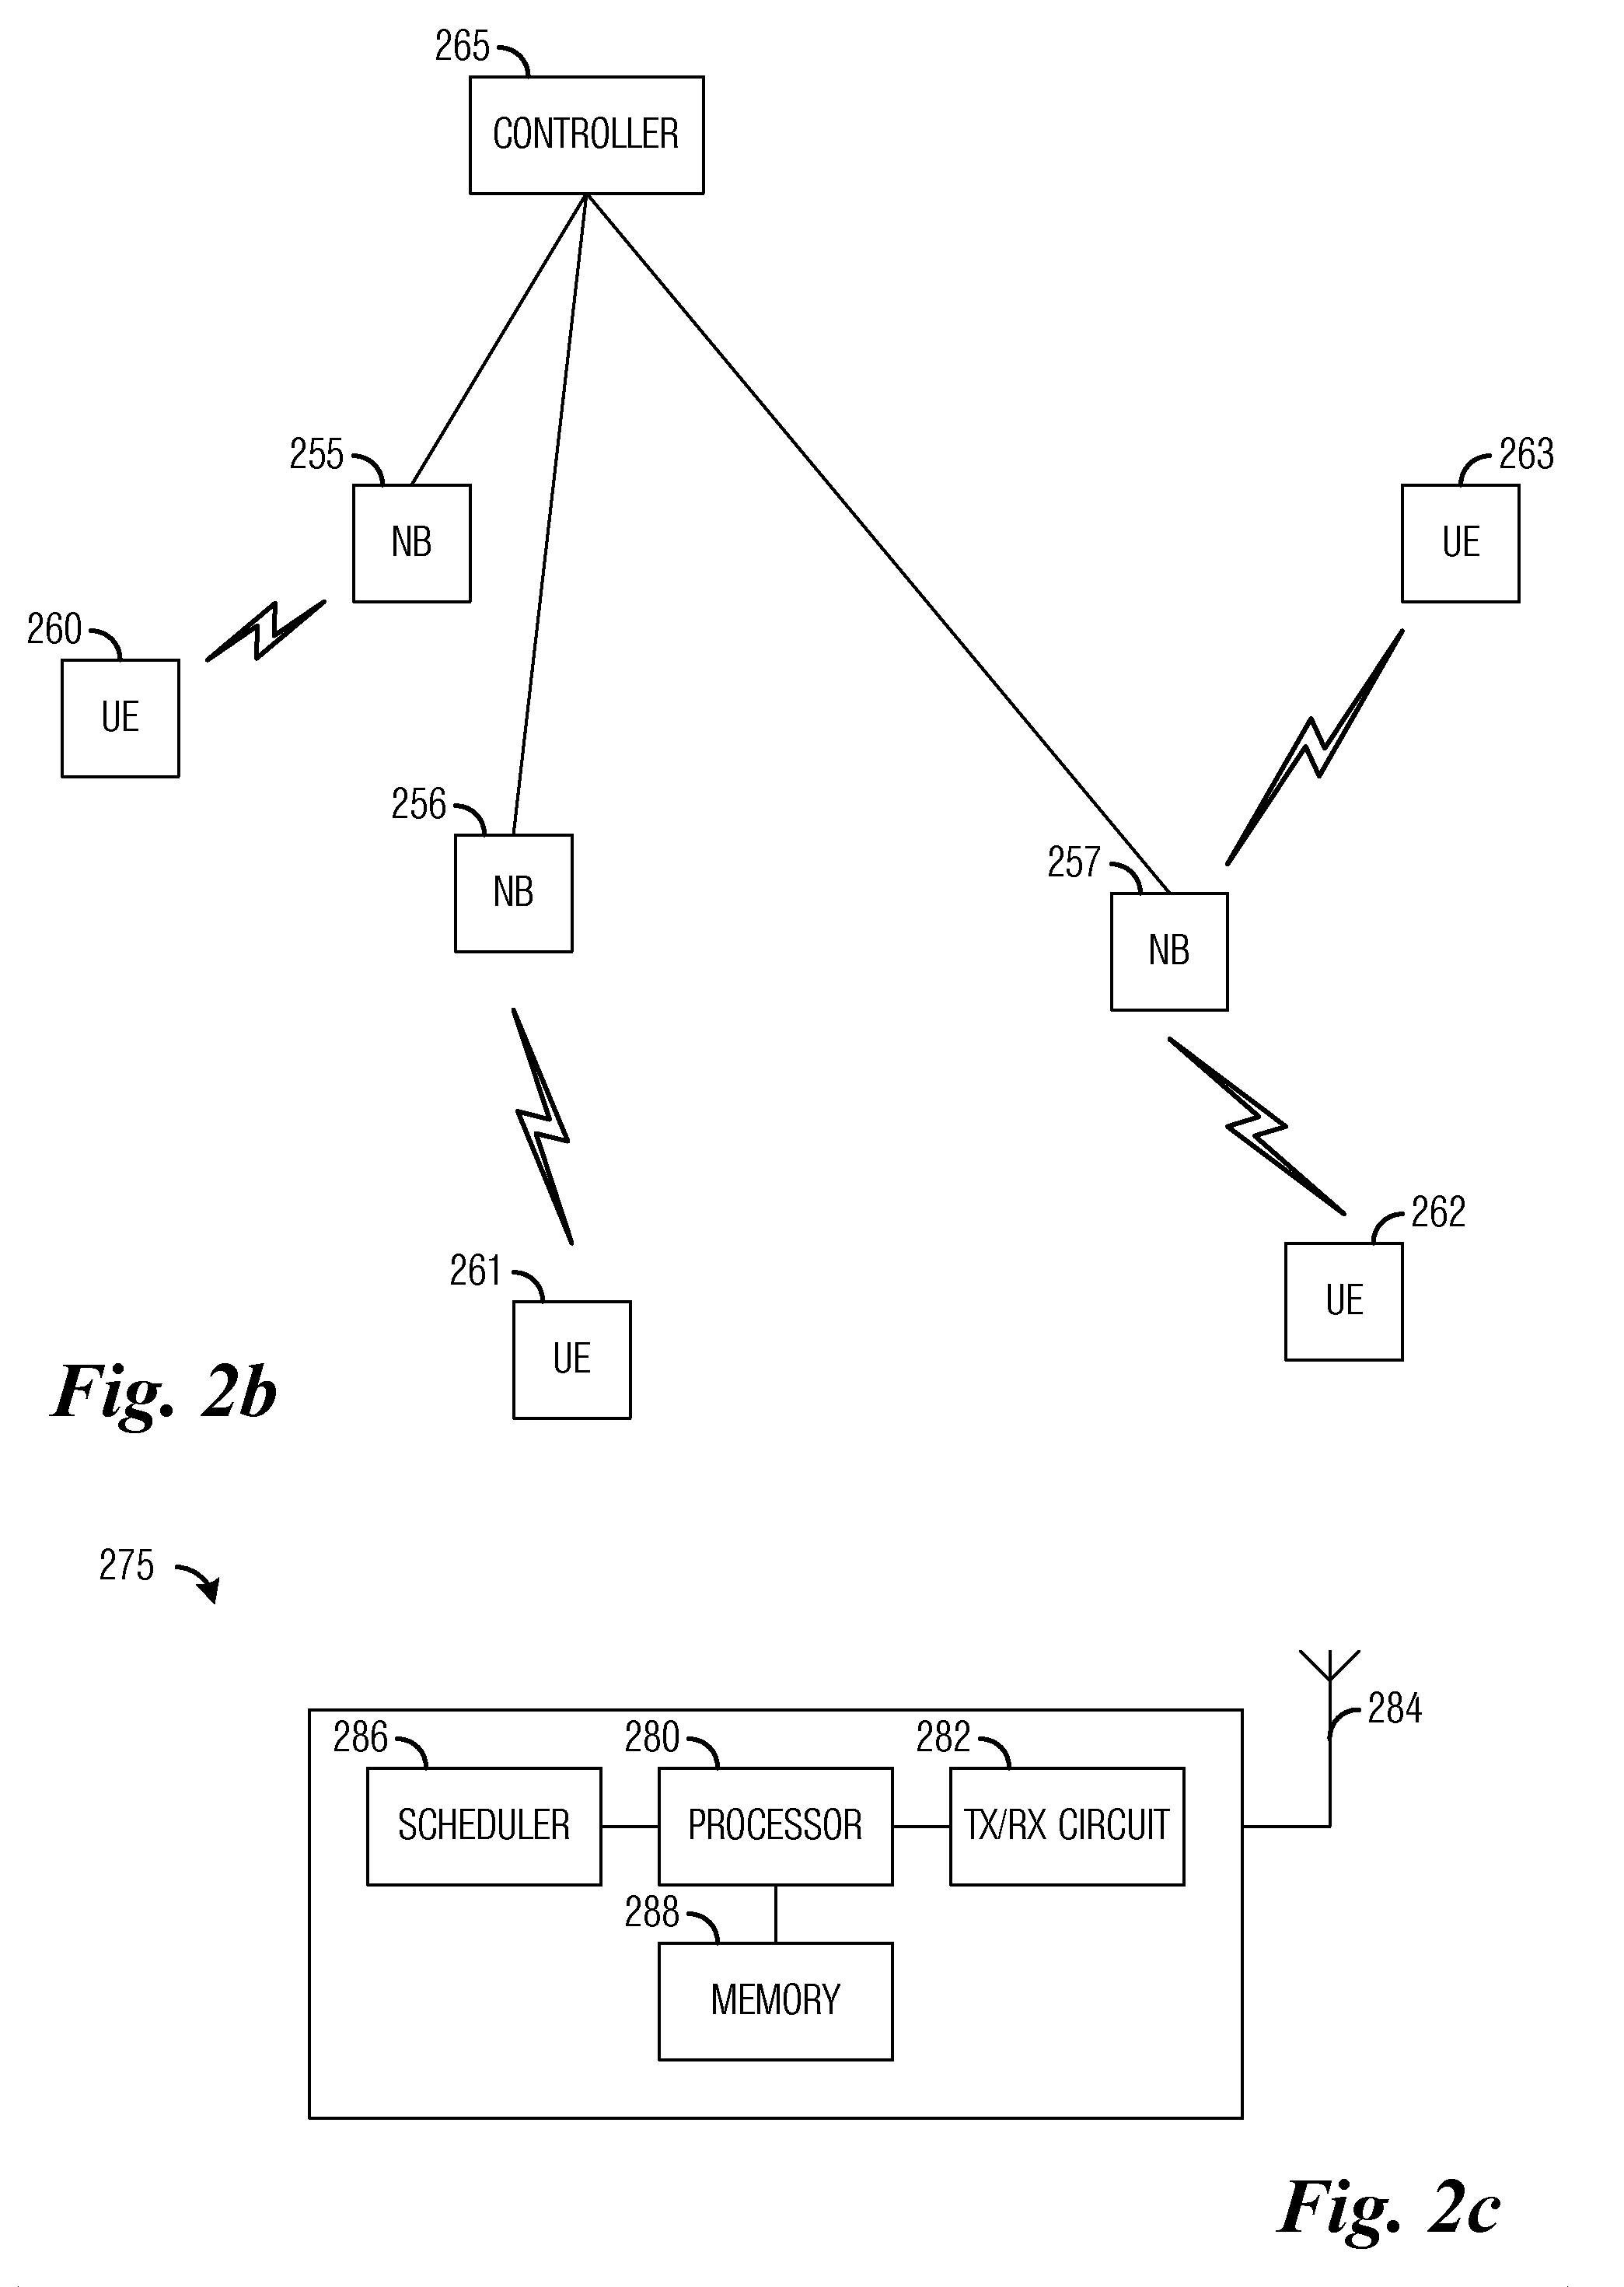 System and Method for Enabling Coordinated Beam Switching and Scheduling